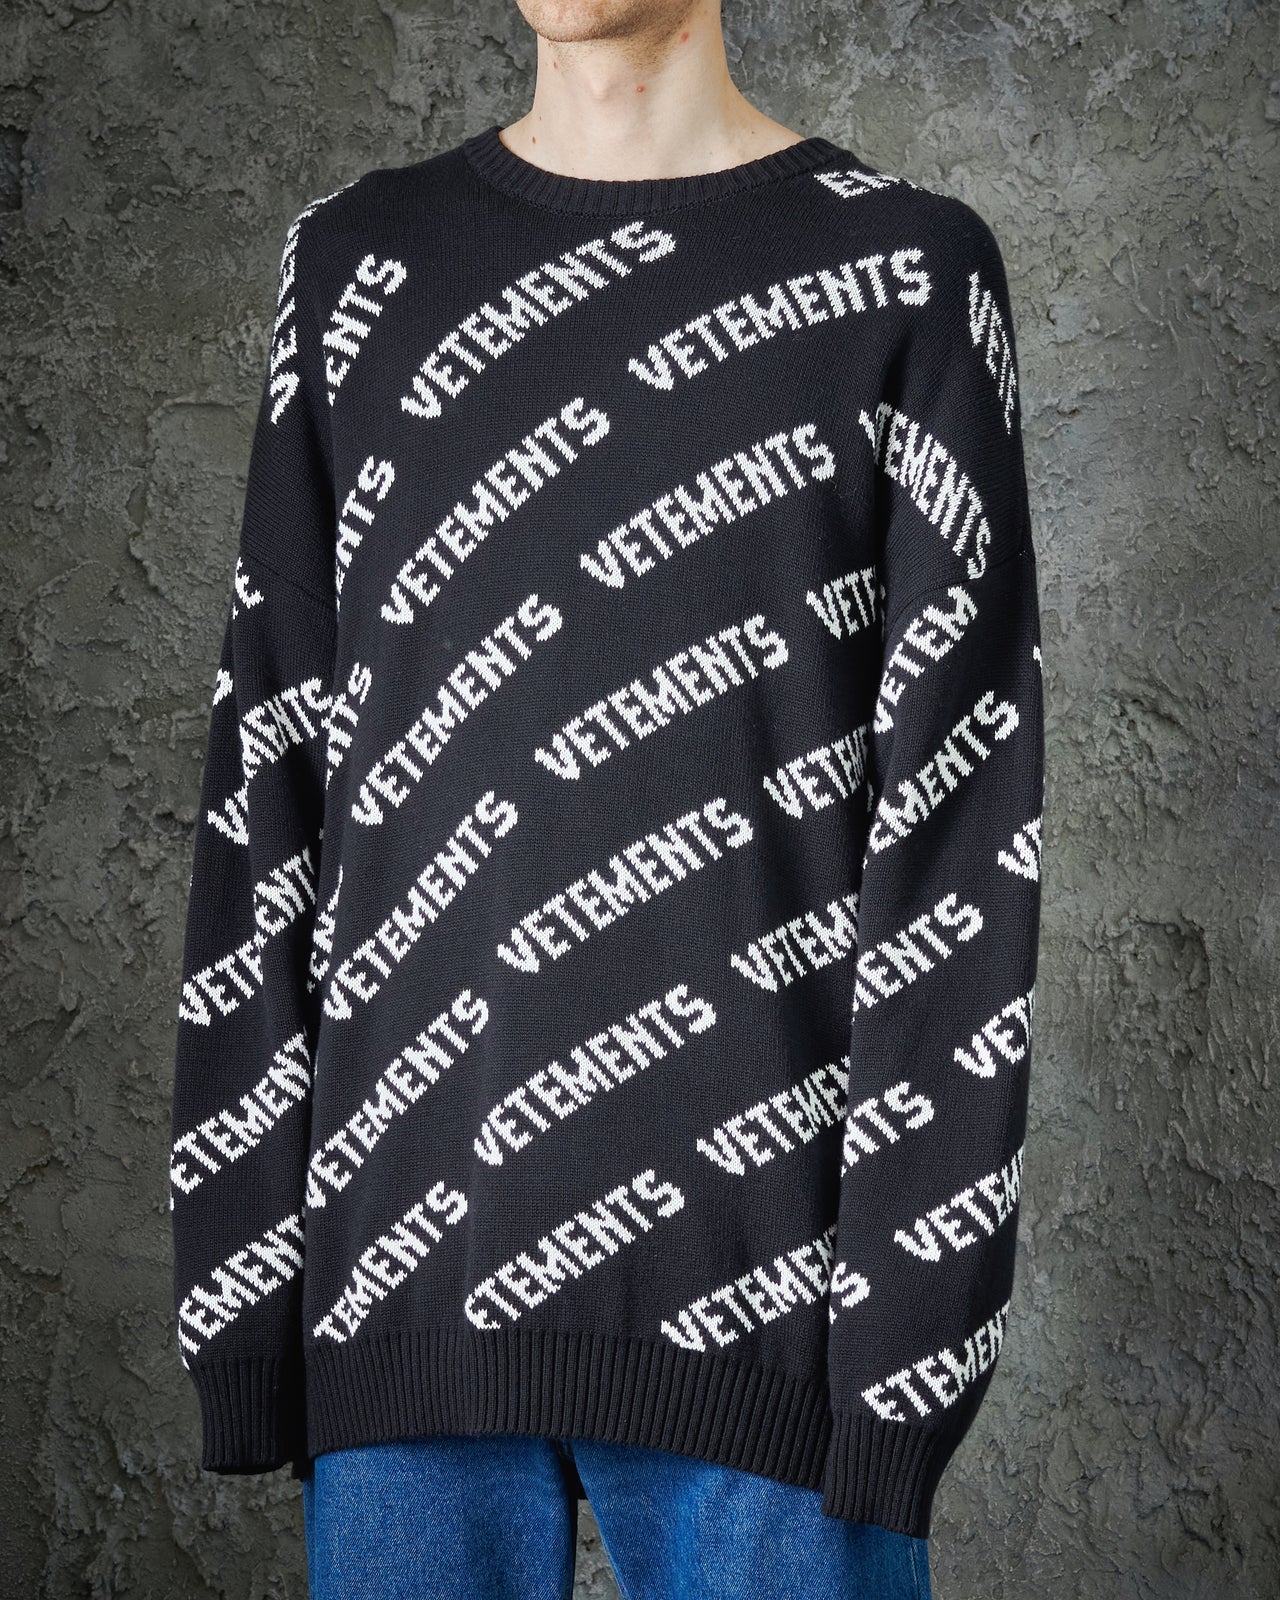 Vetements FW 2021 All over logo knit sweater